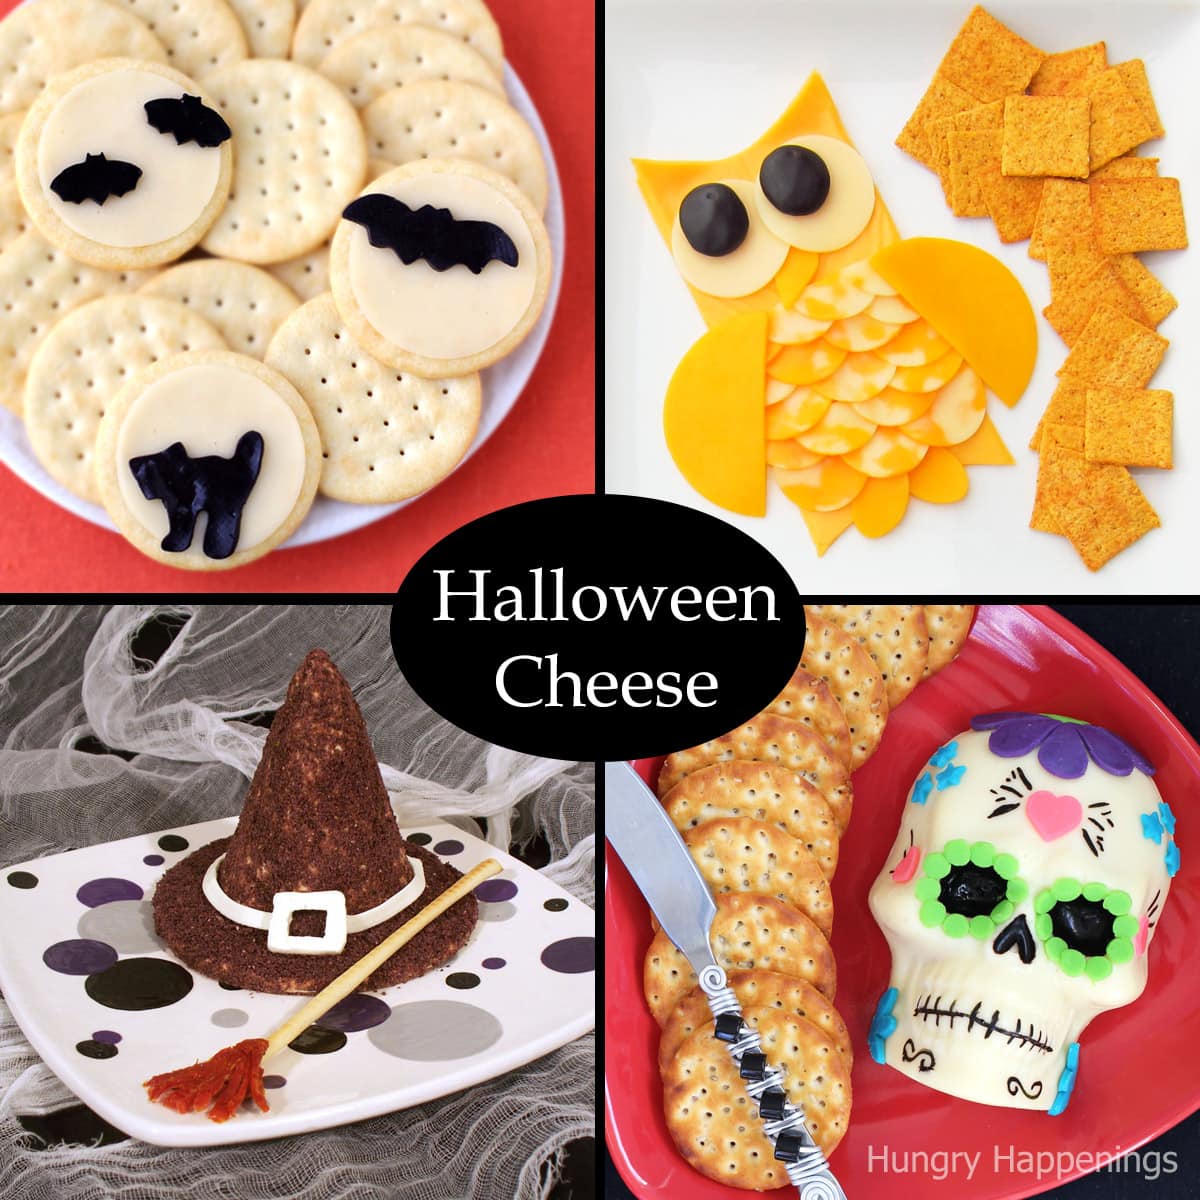 Halloween cheese including black bats, orange owls, a cheese ball witch hat, and a decorated sugar skull cheese.